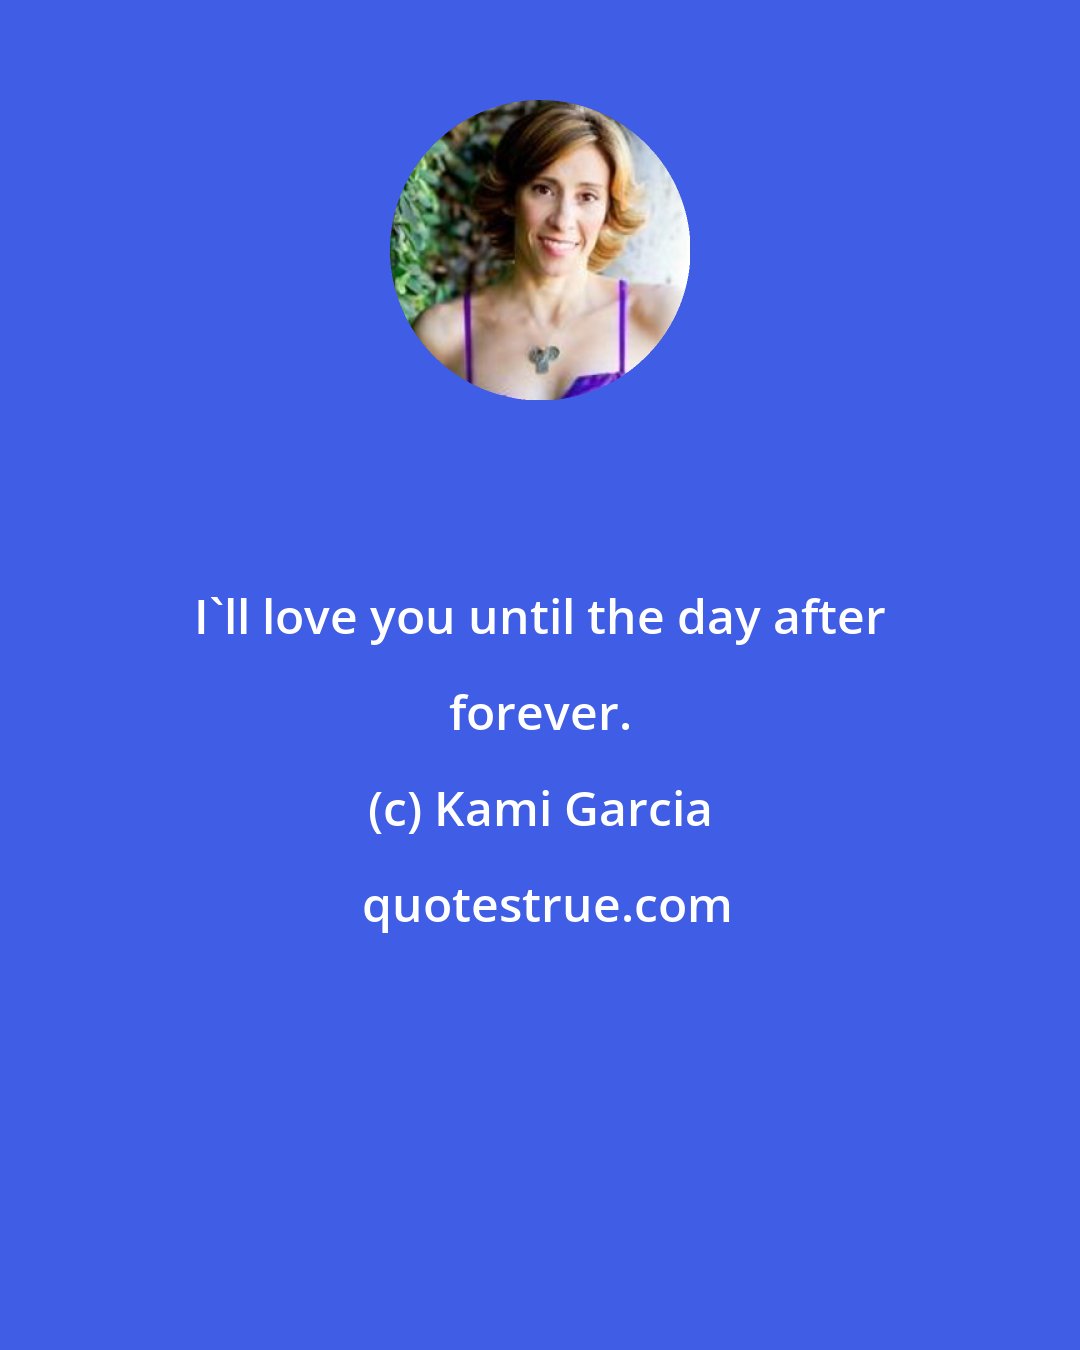 Kami Garcia: I'll love you until the day after forever.